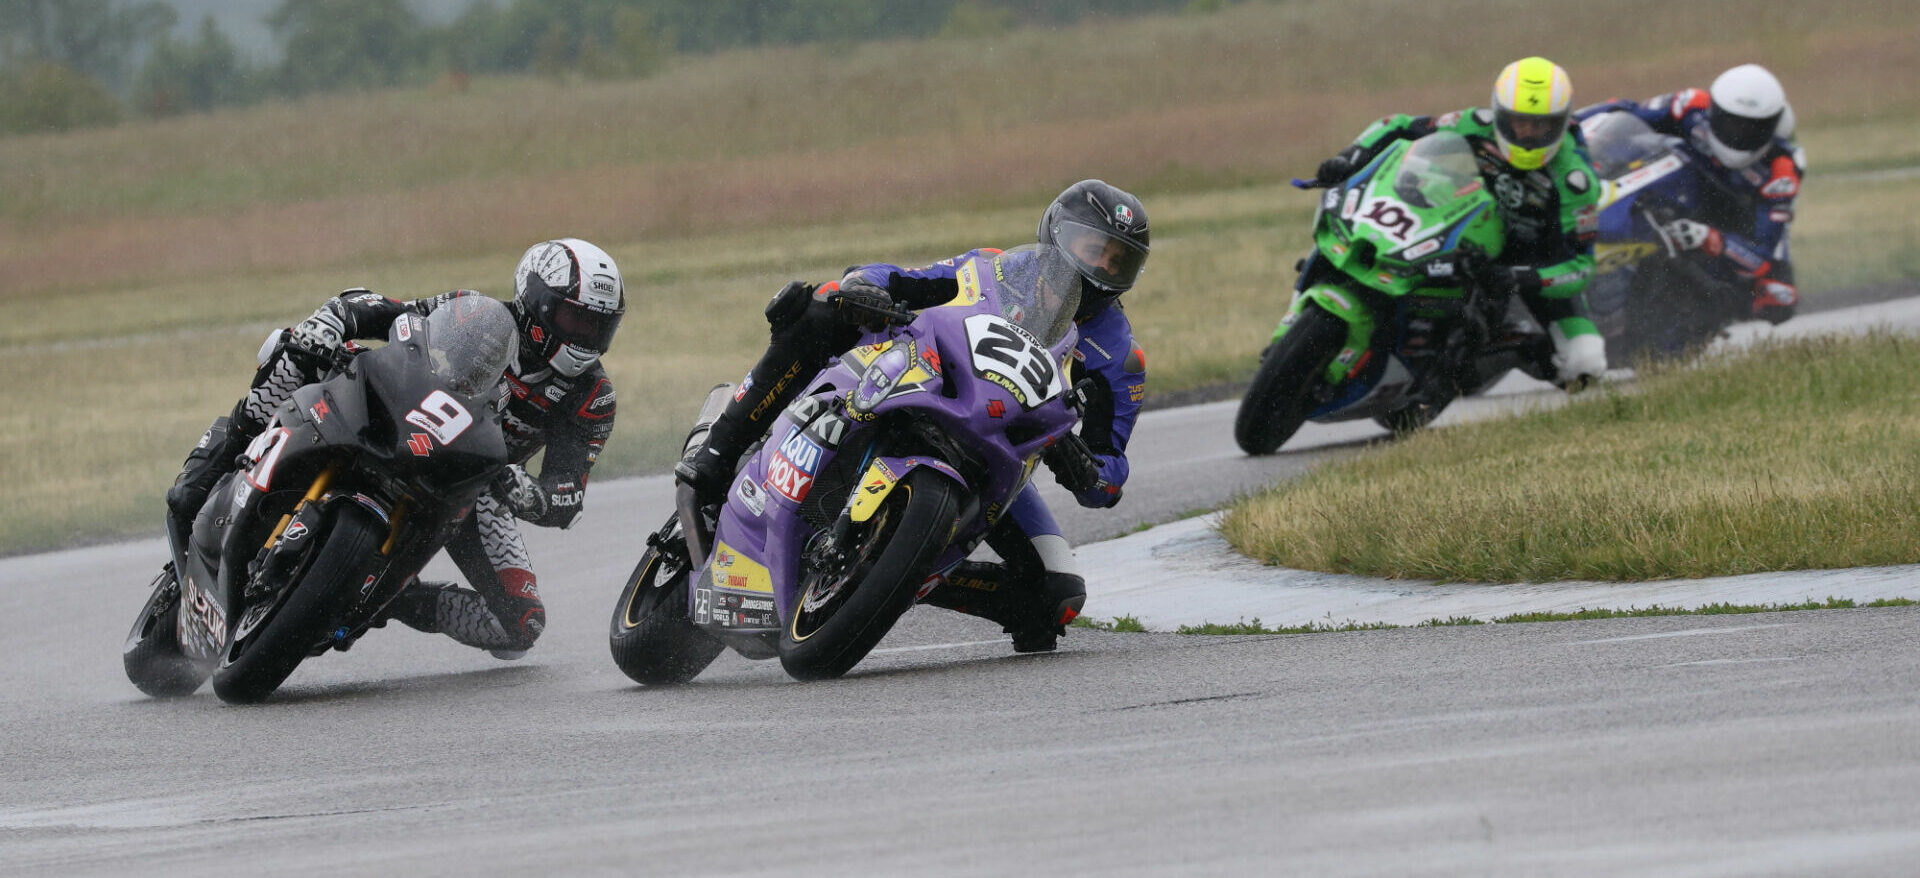 Championship leader Alex Dumas (23) endured the wet conditions Sunday at Grand Bend to take the win. Trevor Daley (9) and Tomas Casas (hidden) both crashed and remounted to finish fourth and 10th, respectively, while Jordan Szoke's (101) race ended early due to a mechanical problem. Photo by Rob O'Brien, courtesy CSBK.